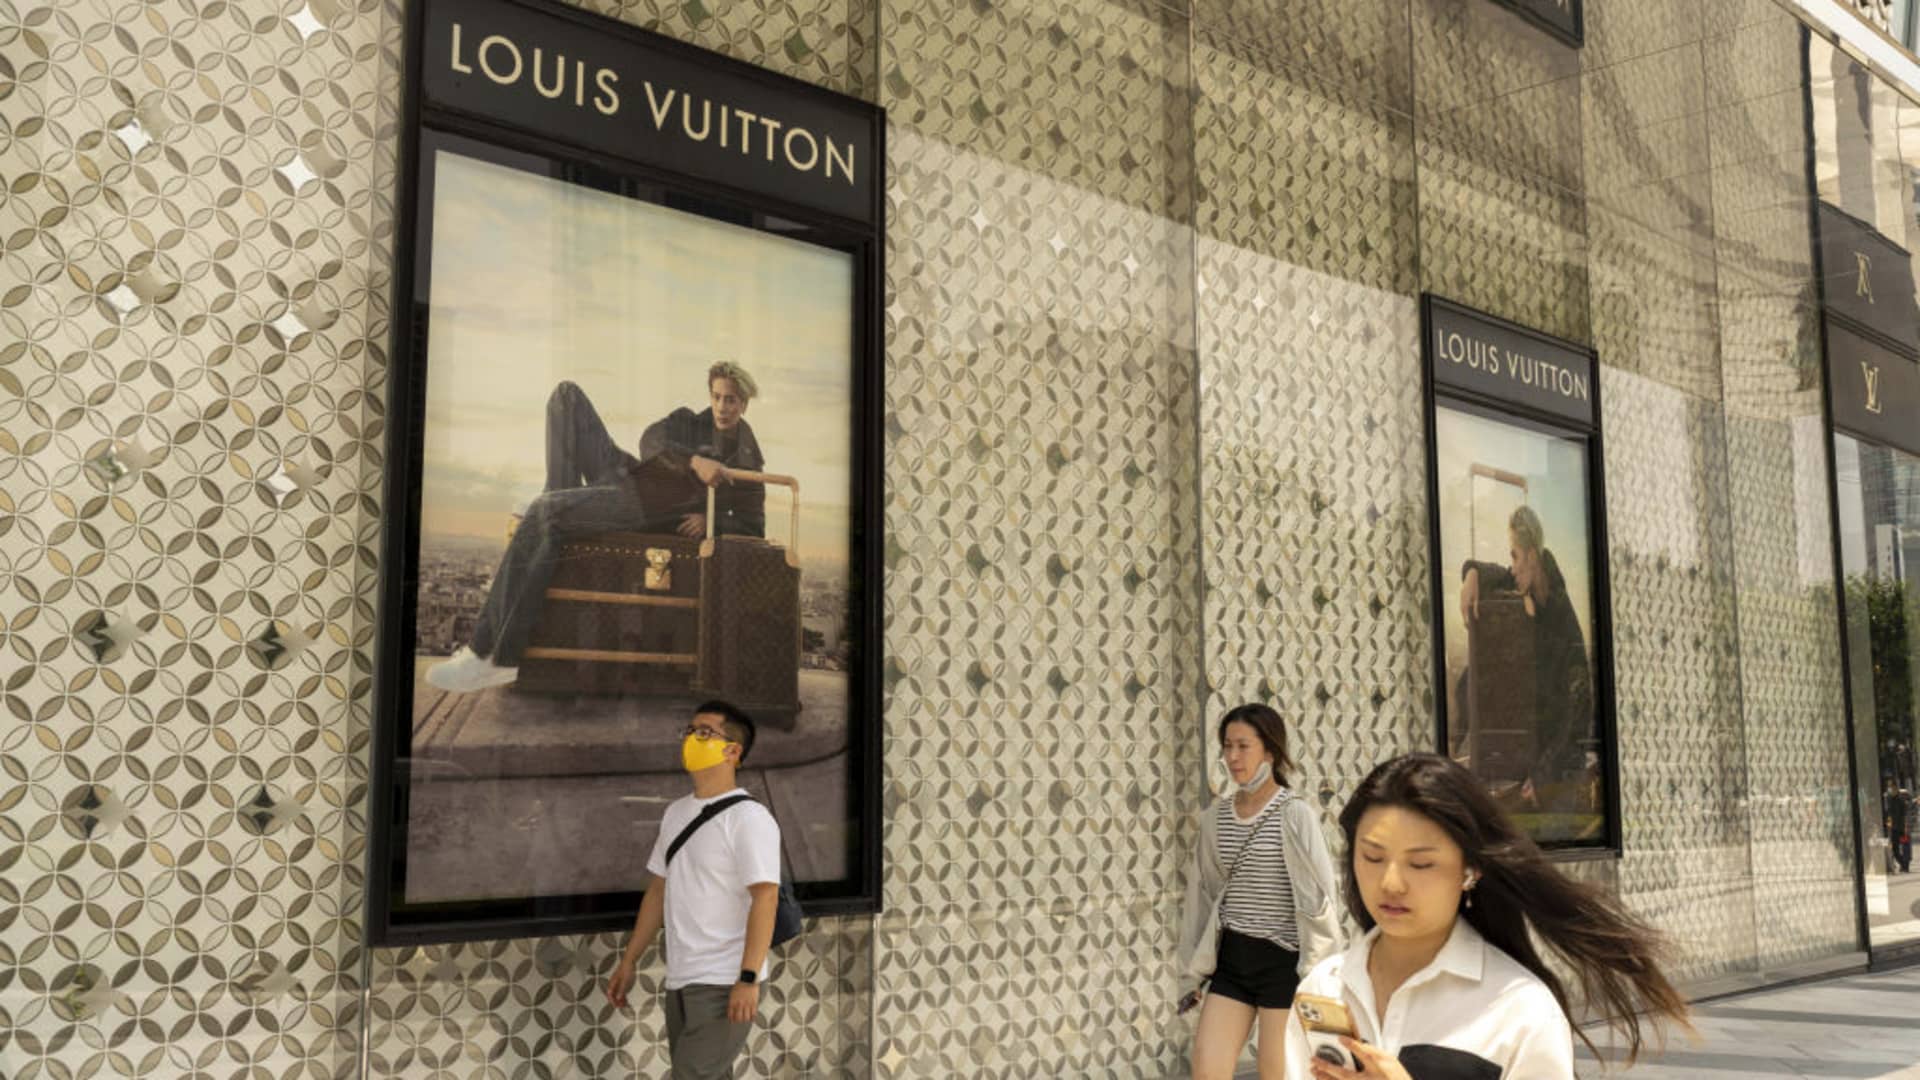 What If the Louis Vuitton Store Came to You?